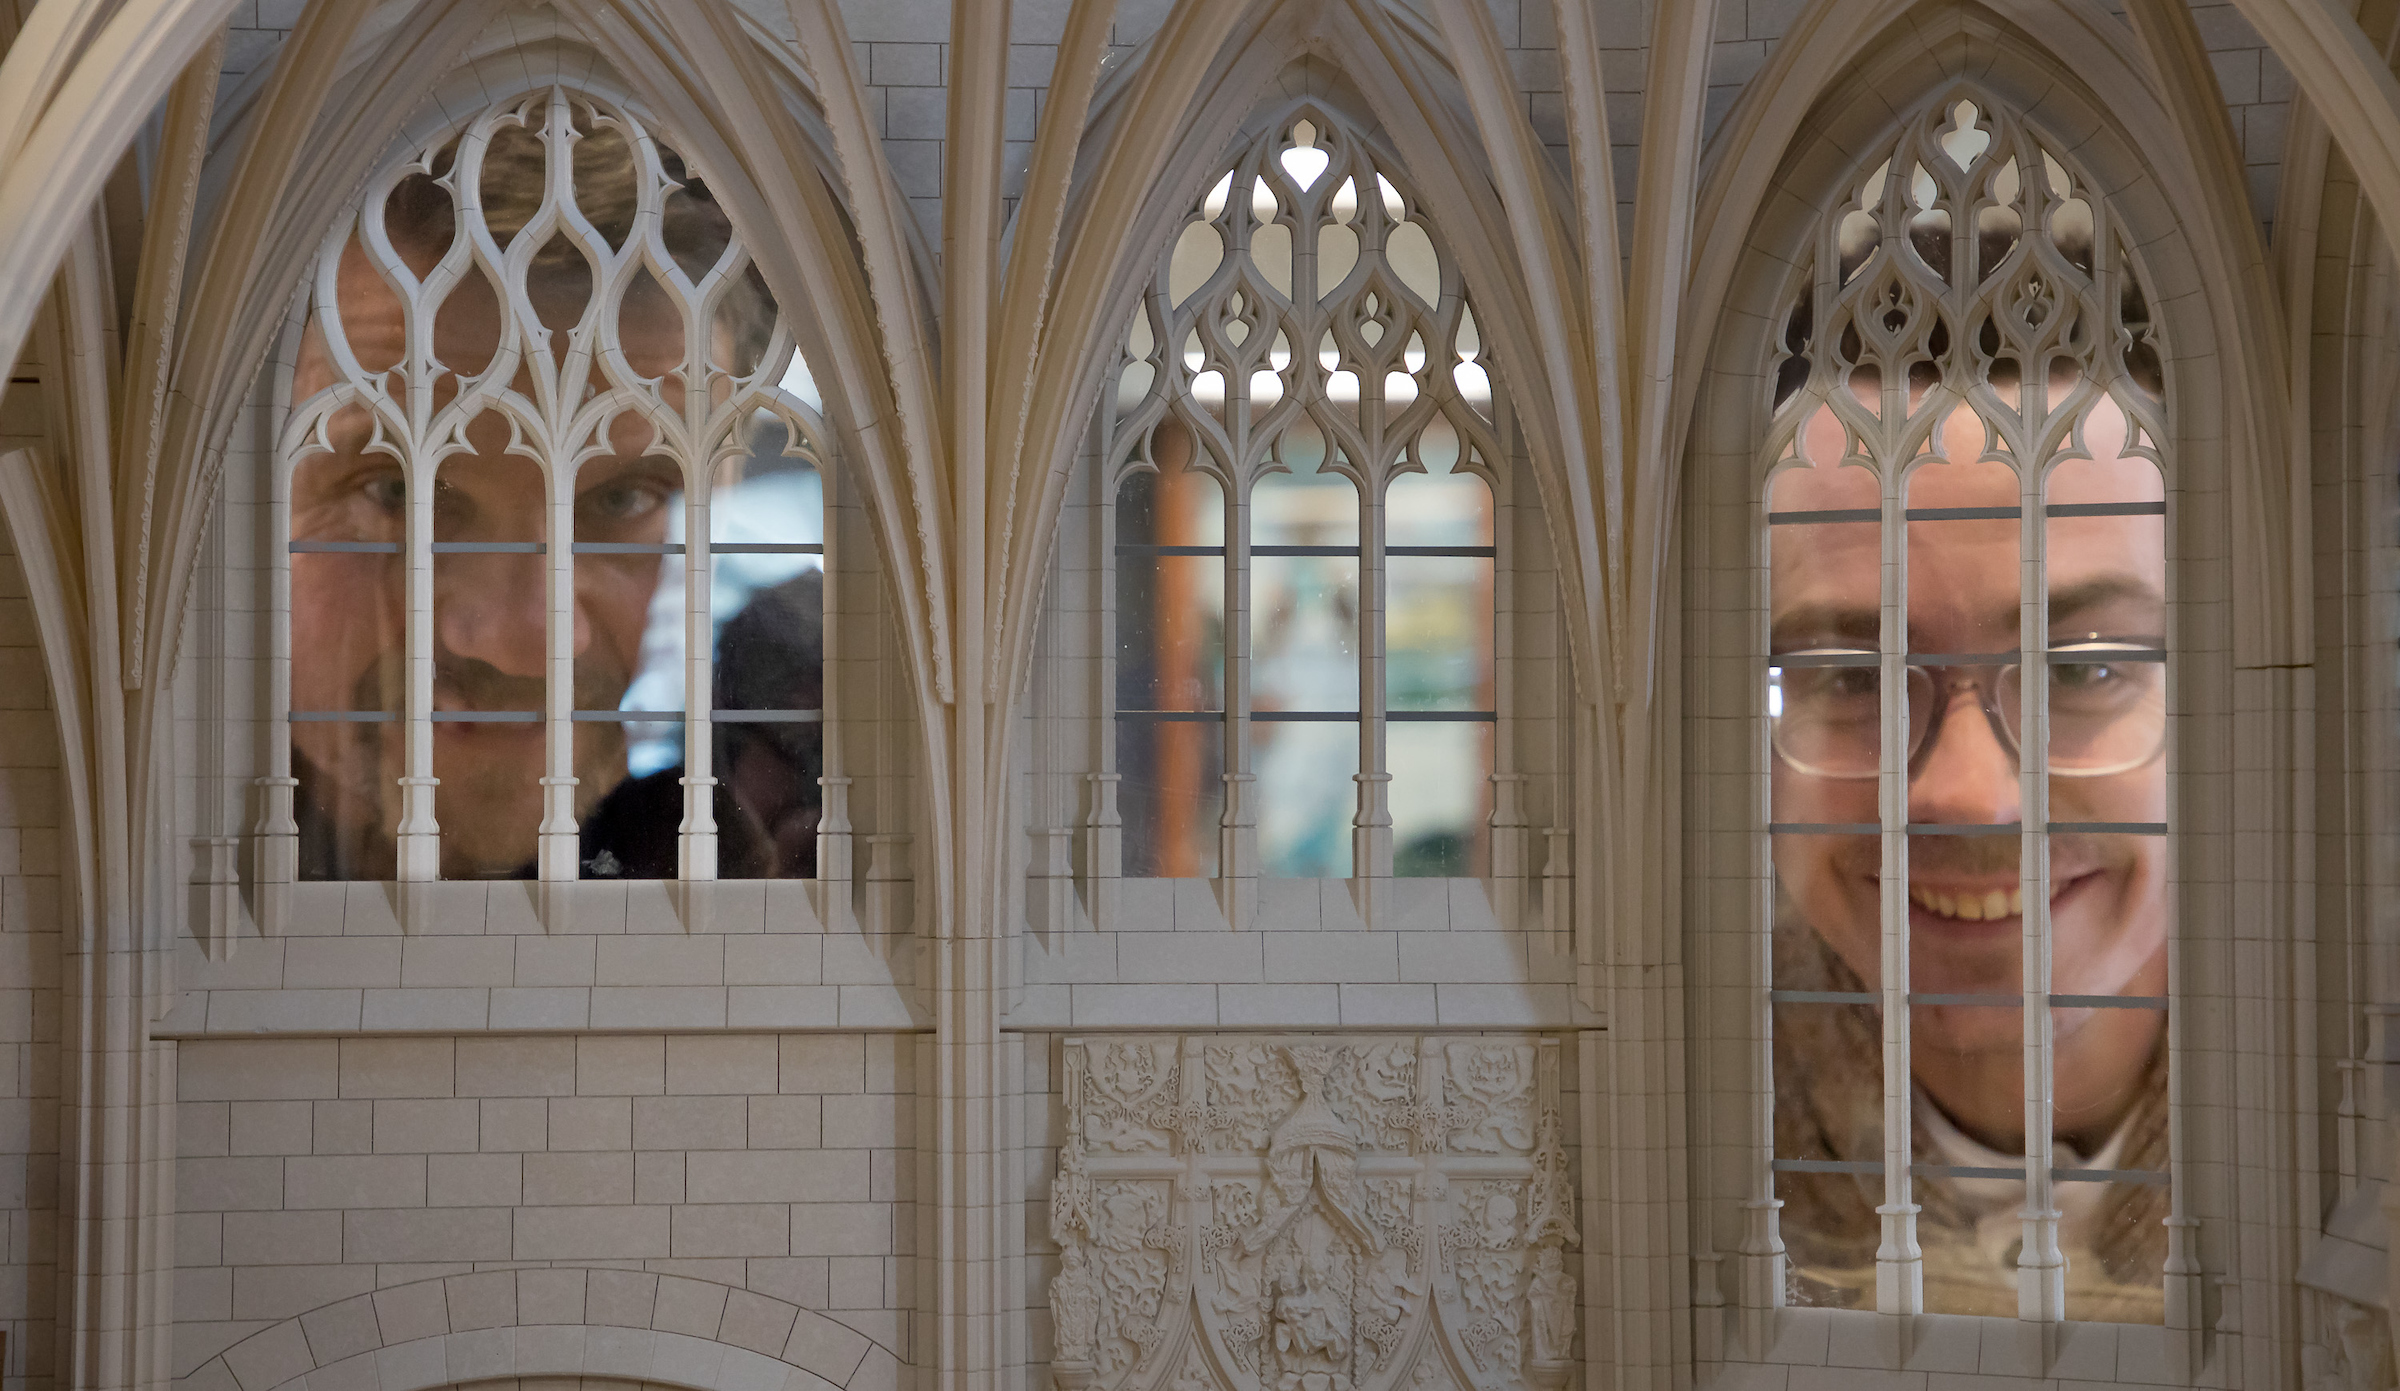 Image of people looking in windows of Folleville church model